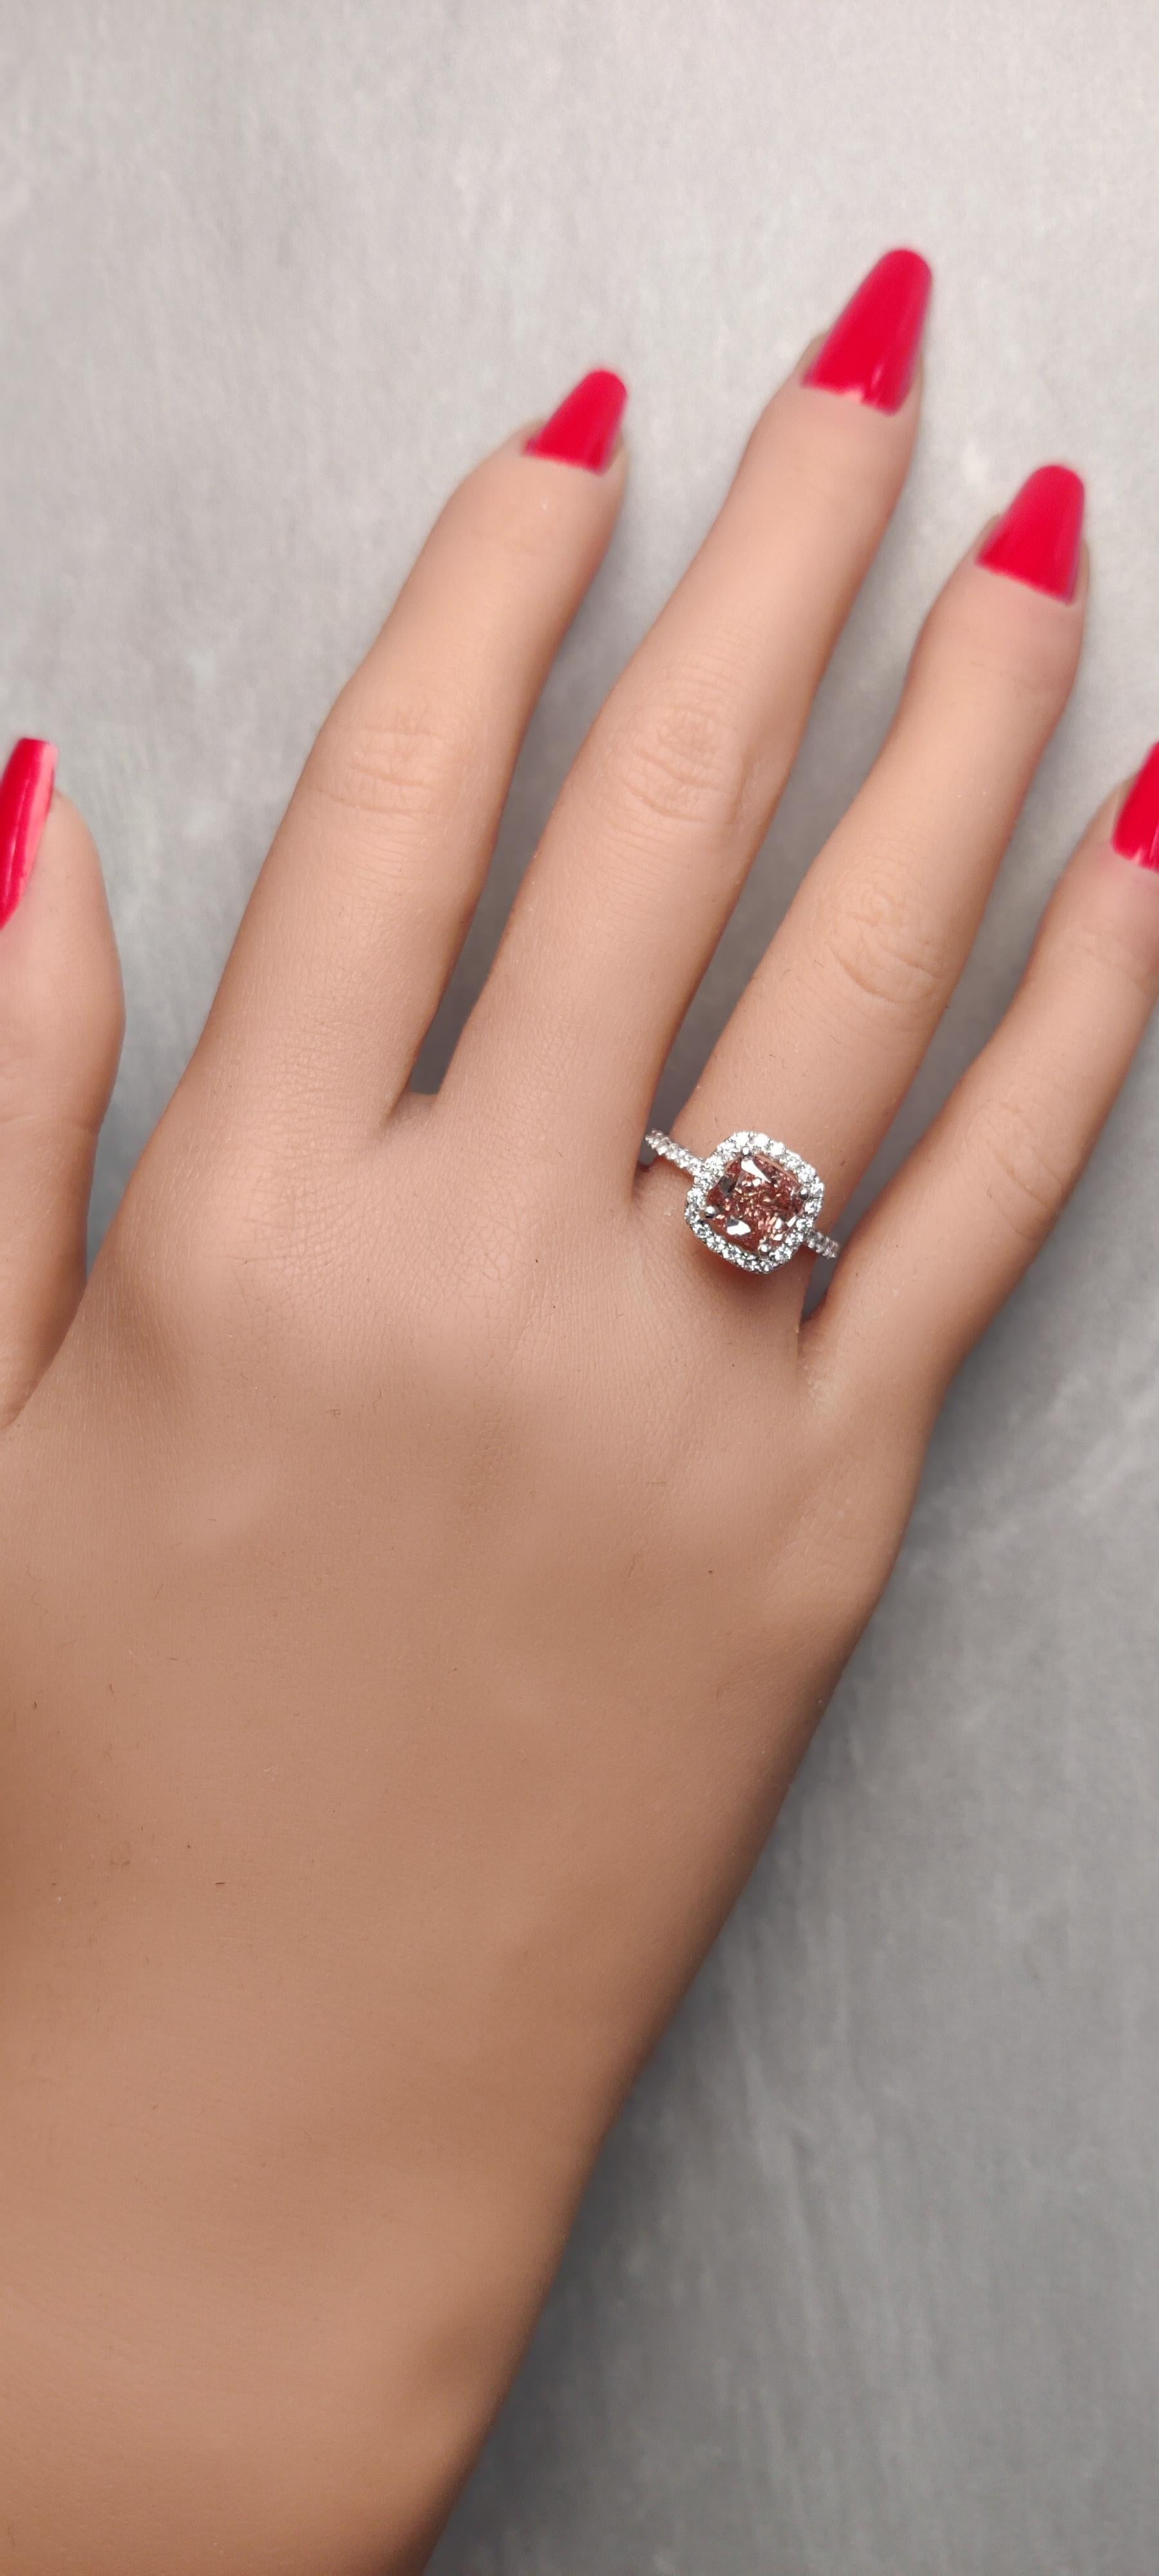 RareGemWorld's classic GIA certified diamond ring. Mounted in a beautiful 18k white gold setting with a natural cushion cut pink diamond. The pink diamond is surrounded by  round natural white diamond melee. This ring is guaranteed to impress and